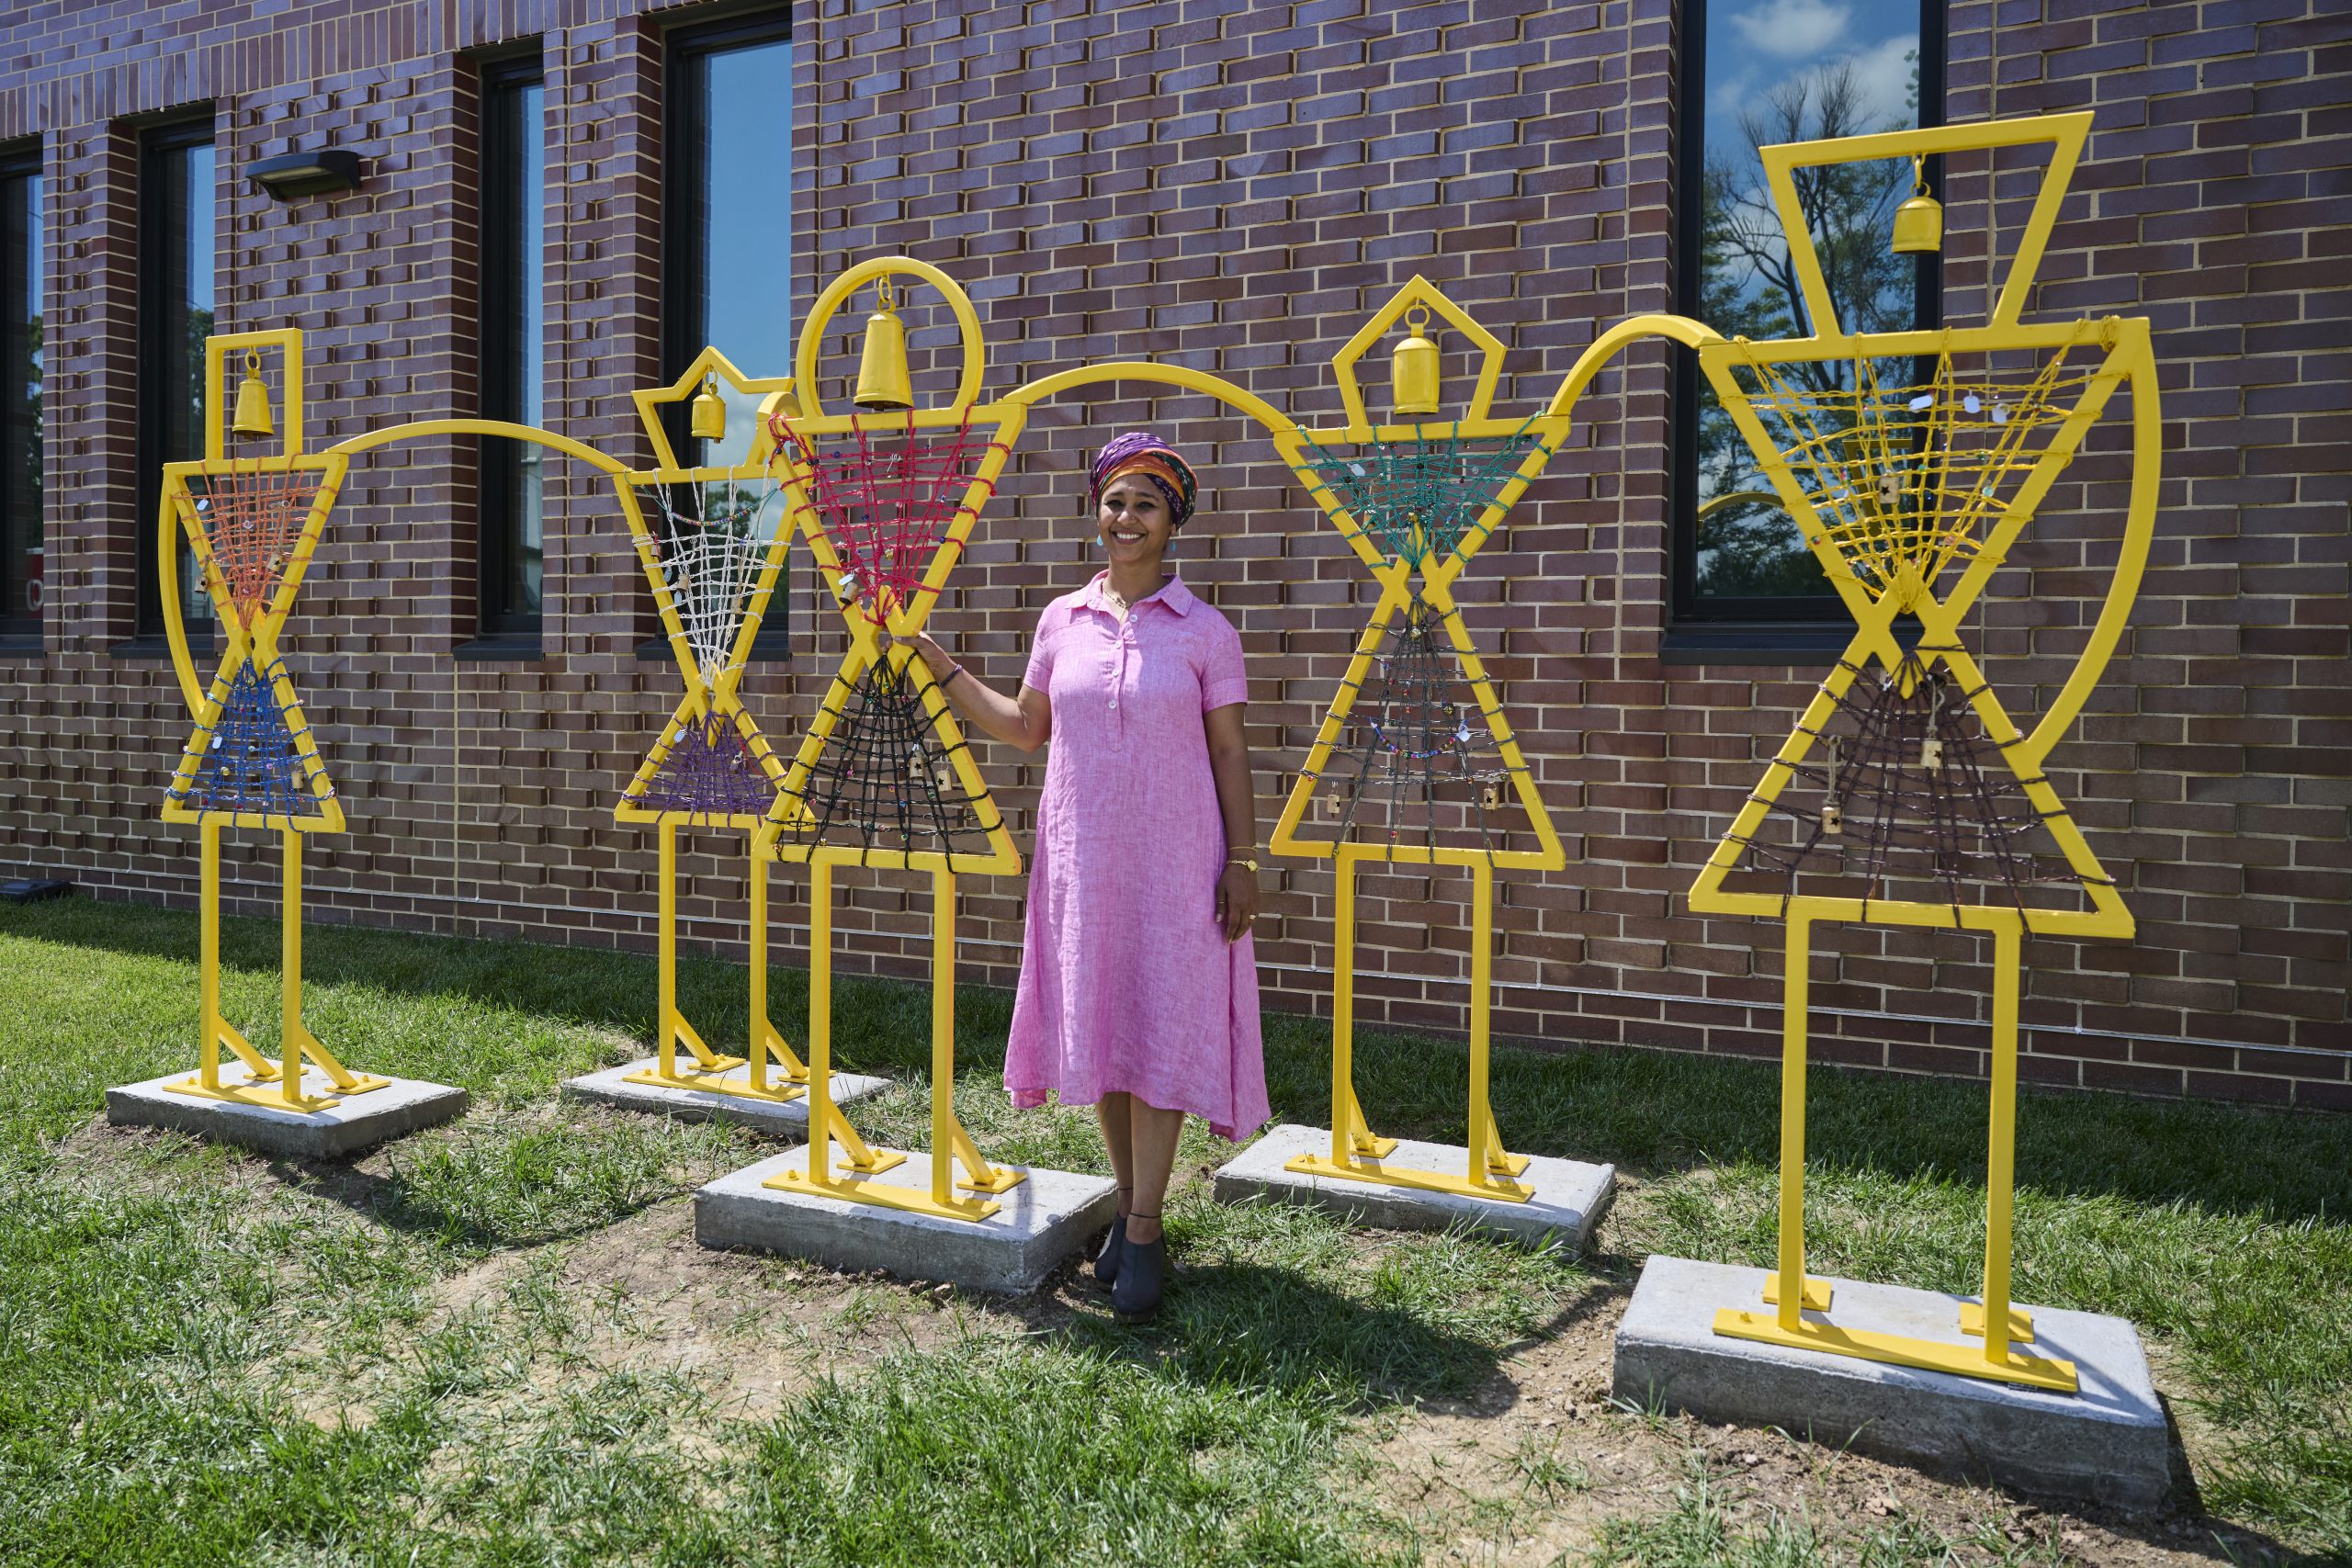 “US: United Sapiens” is now on view at Veterans Community Project St. Louis!
This public sculpture, co-created with artist Mee Jey, community members, and VCP-STL staff and volunteers, was commissioned as part of Collective Impact, a collaborative initiative between Contemporary Art Museum, St. Louis, Creative Reaction Lab, and a cohort of community members. The sculpture celebrates cooperation and solidarity through five interconnected steel figures, which are woven with colorful cables and small embellishments designed and created with community participation.